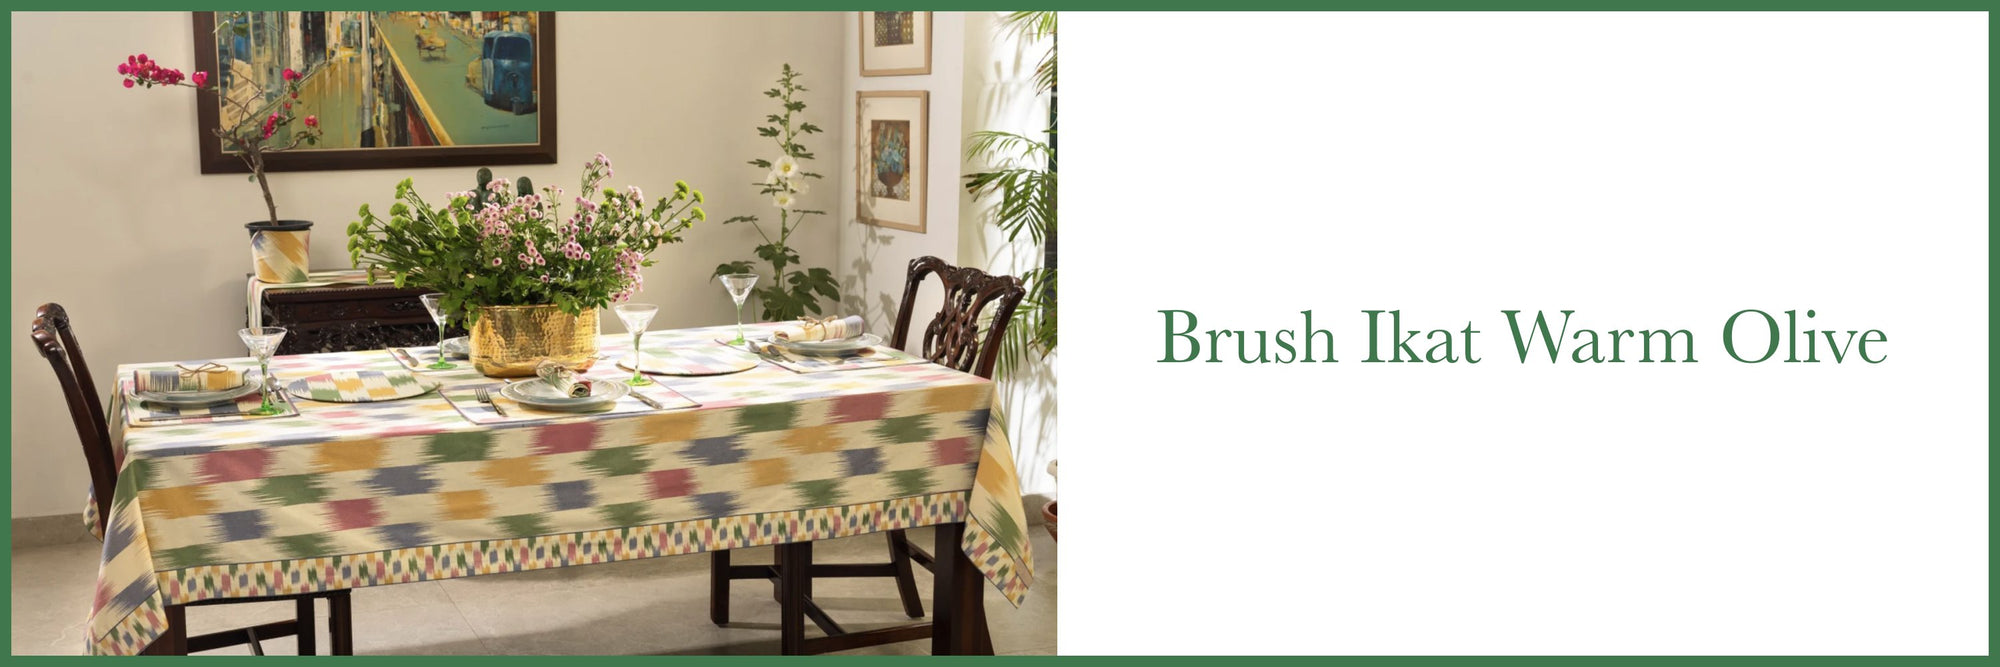 Brush Ikat Warm Olive - Dining Collection